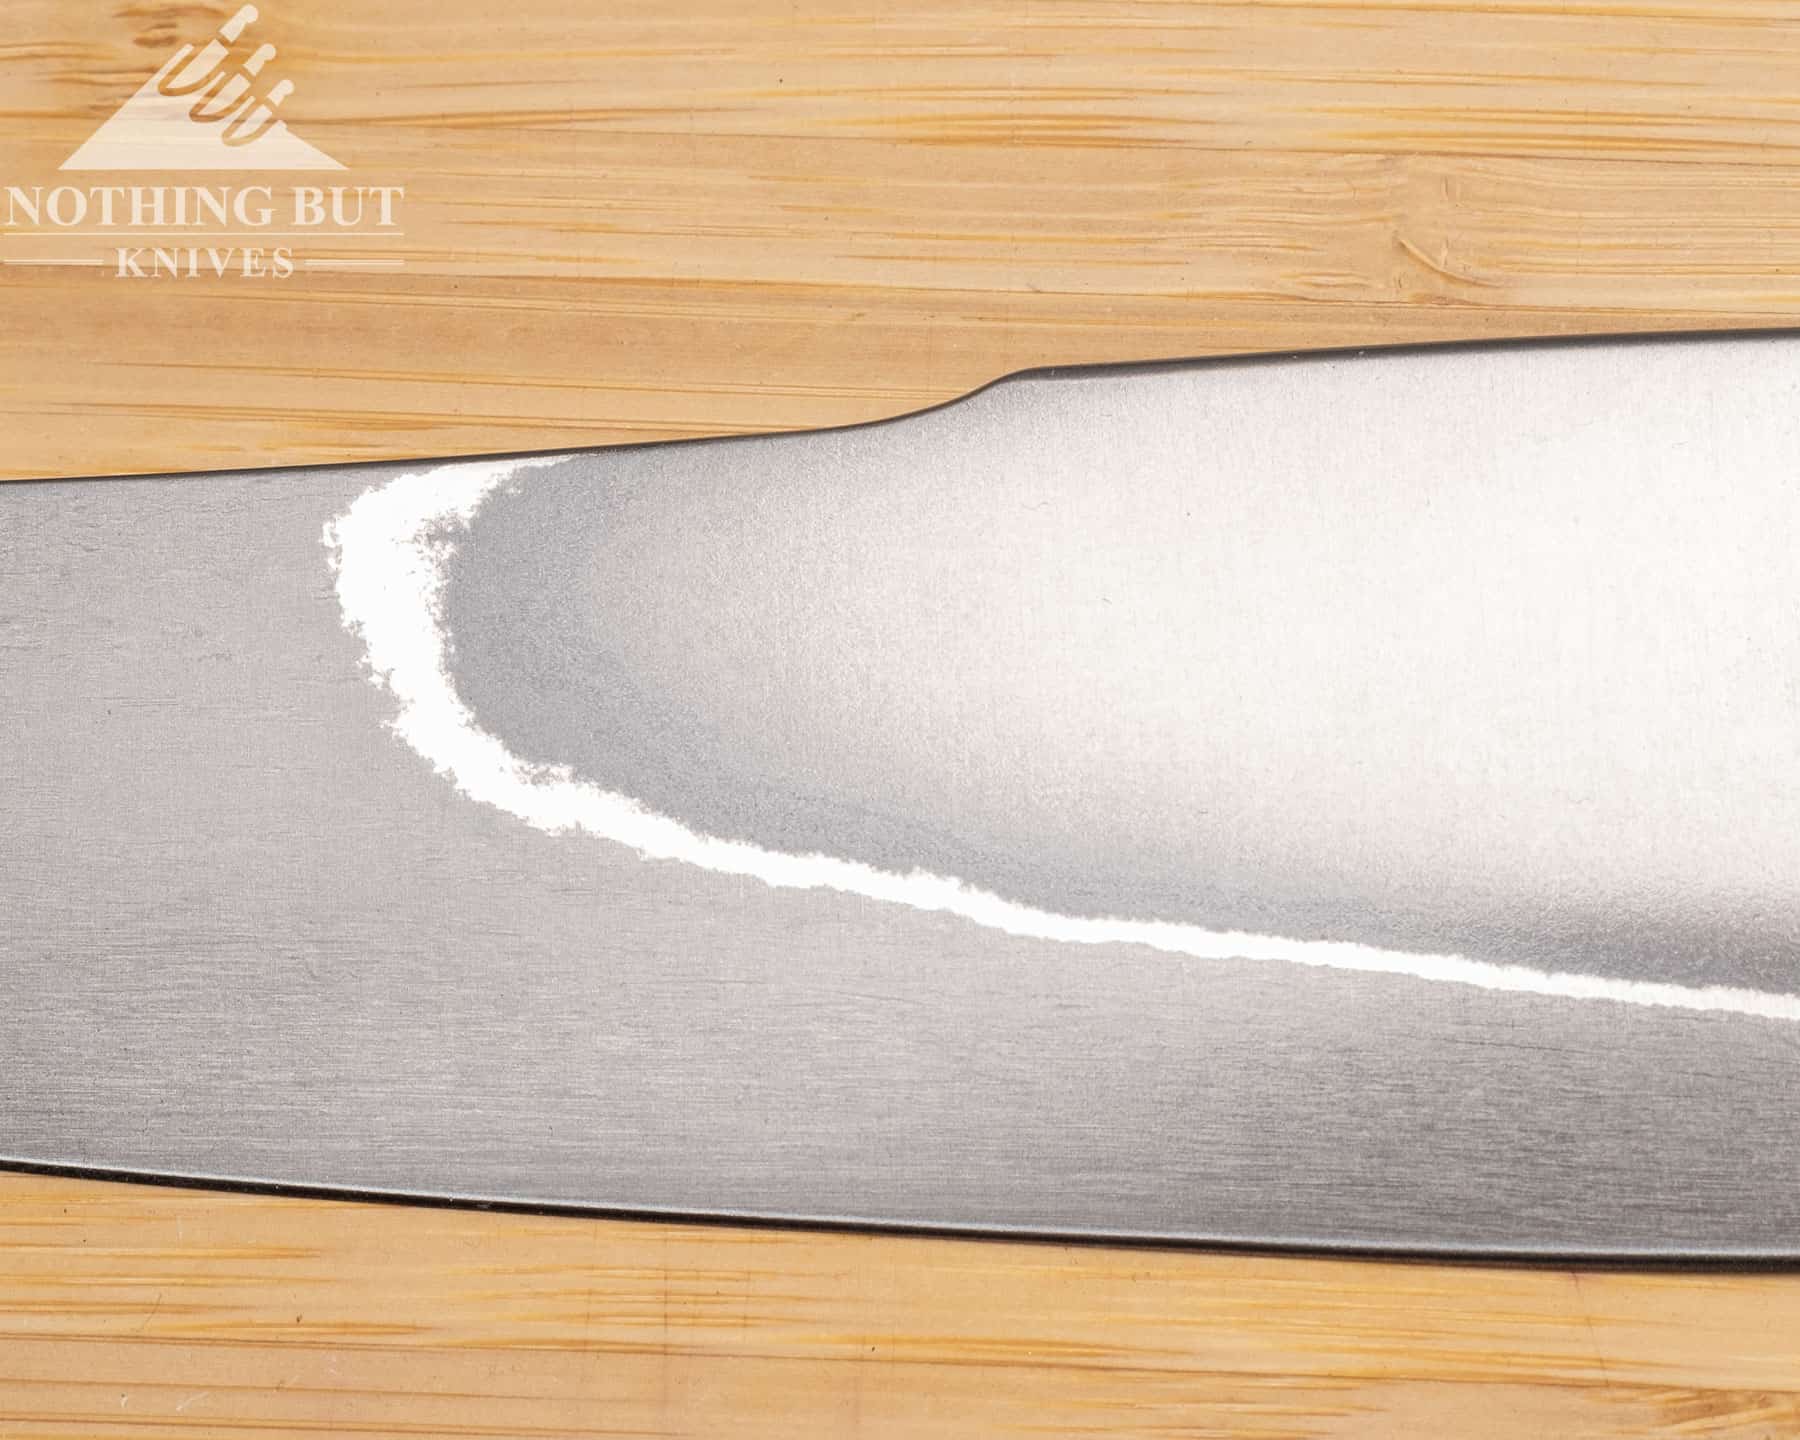 The blade dip on the spine of the Xin Cutlery XinCraft petty chef knife serves a purpose beyond aesthetics. 